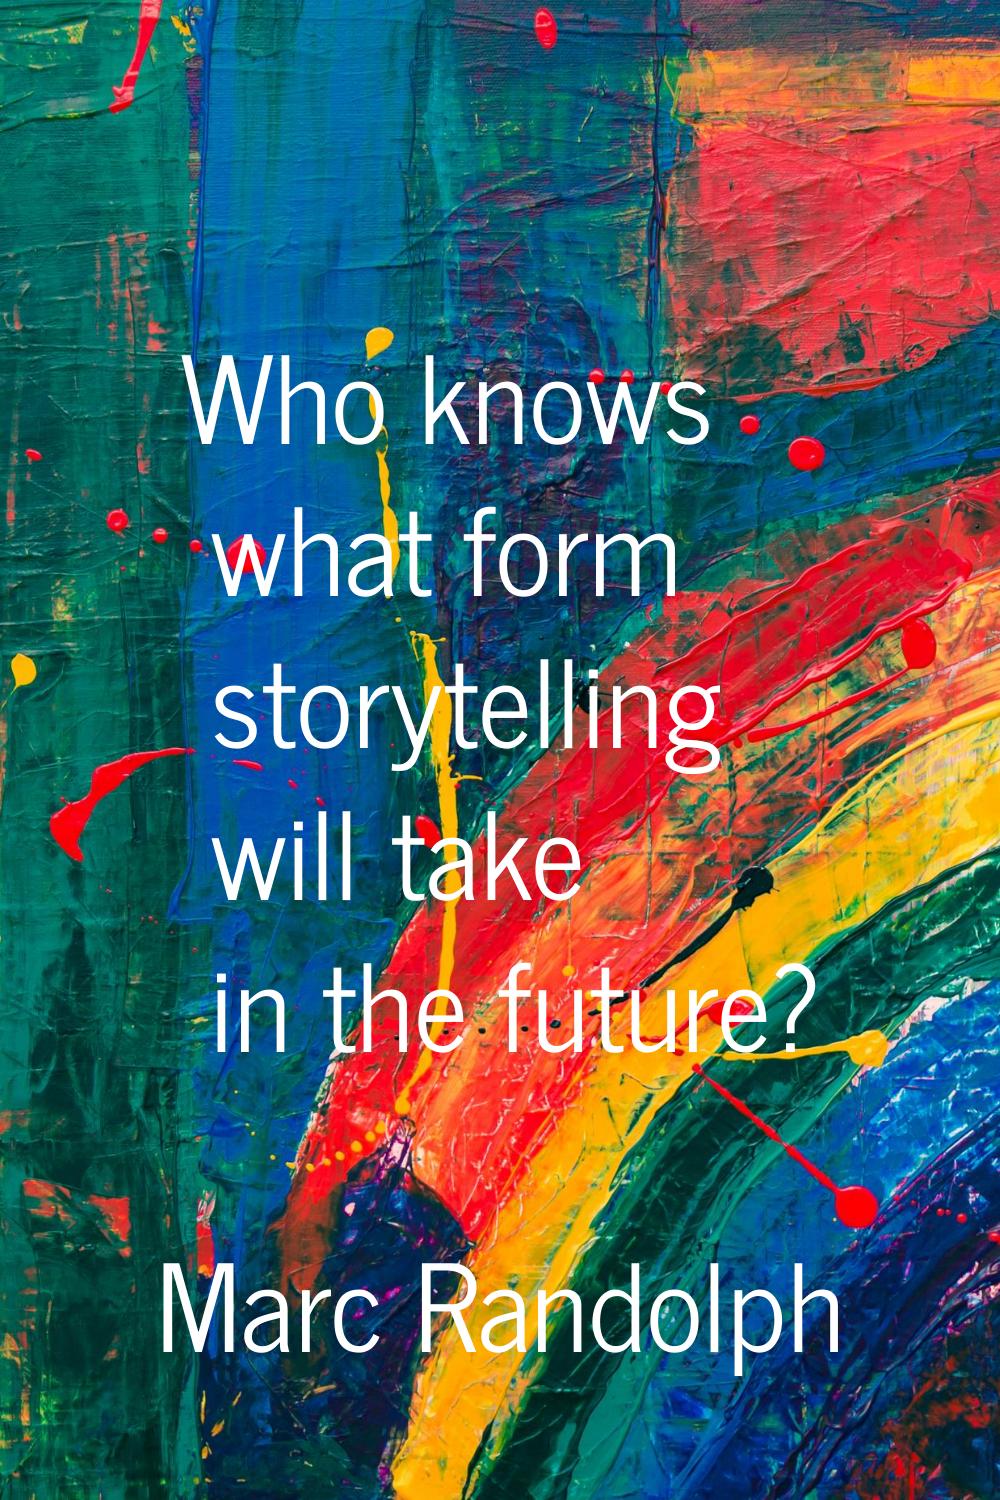 Who knows what form storytelling will take in the future?